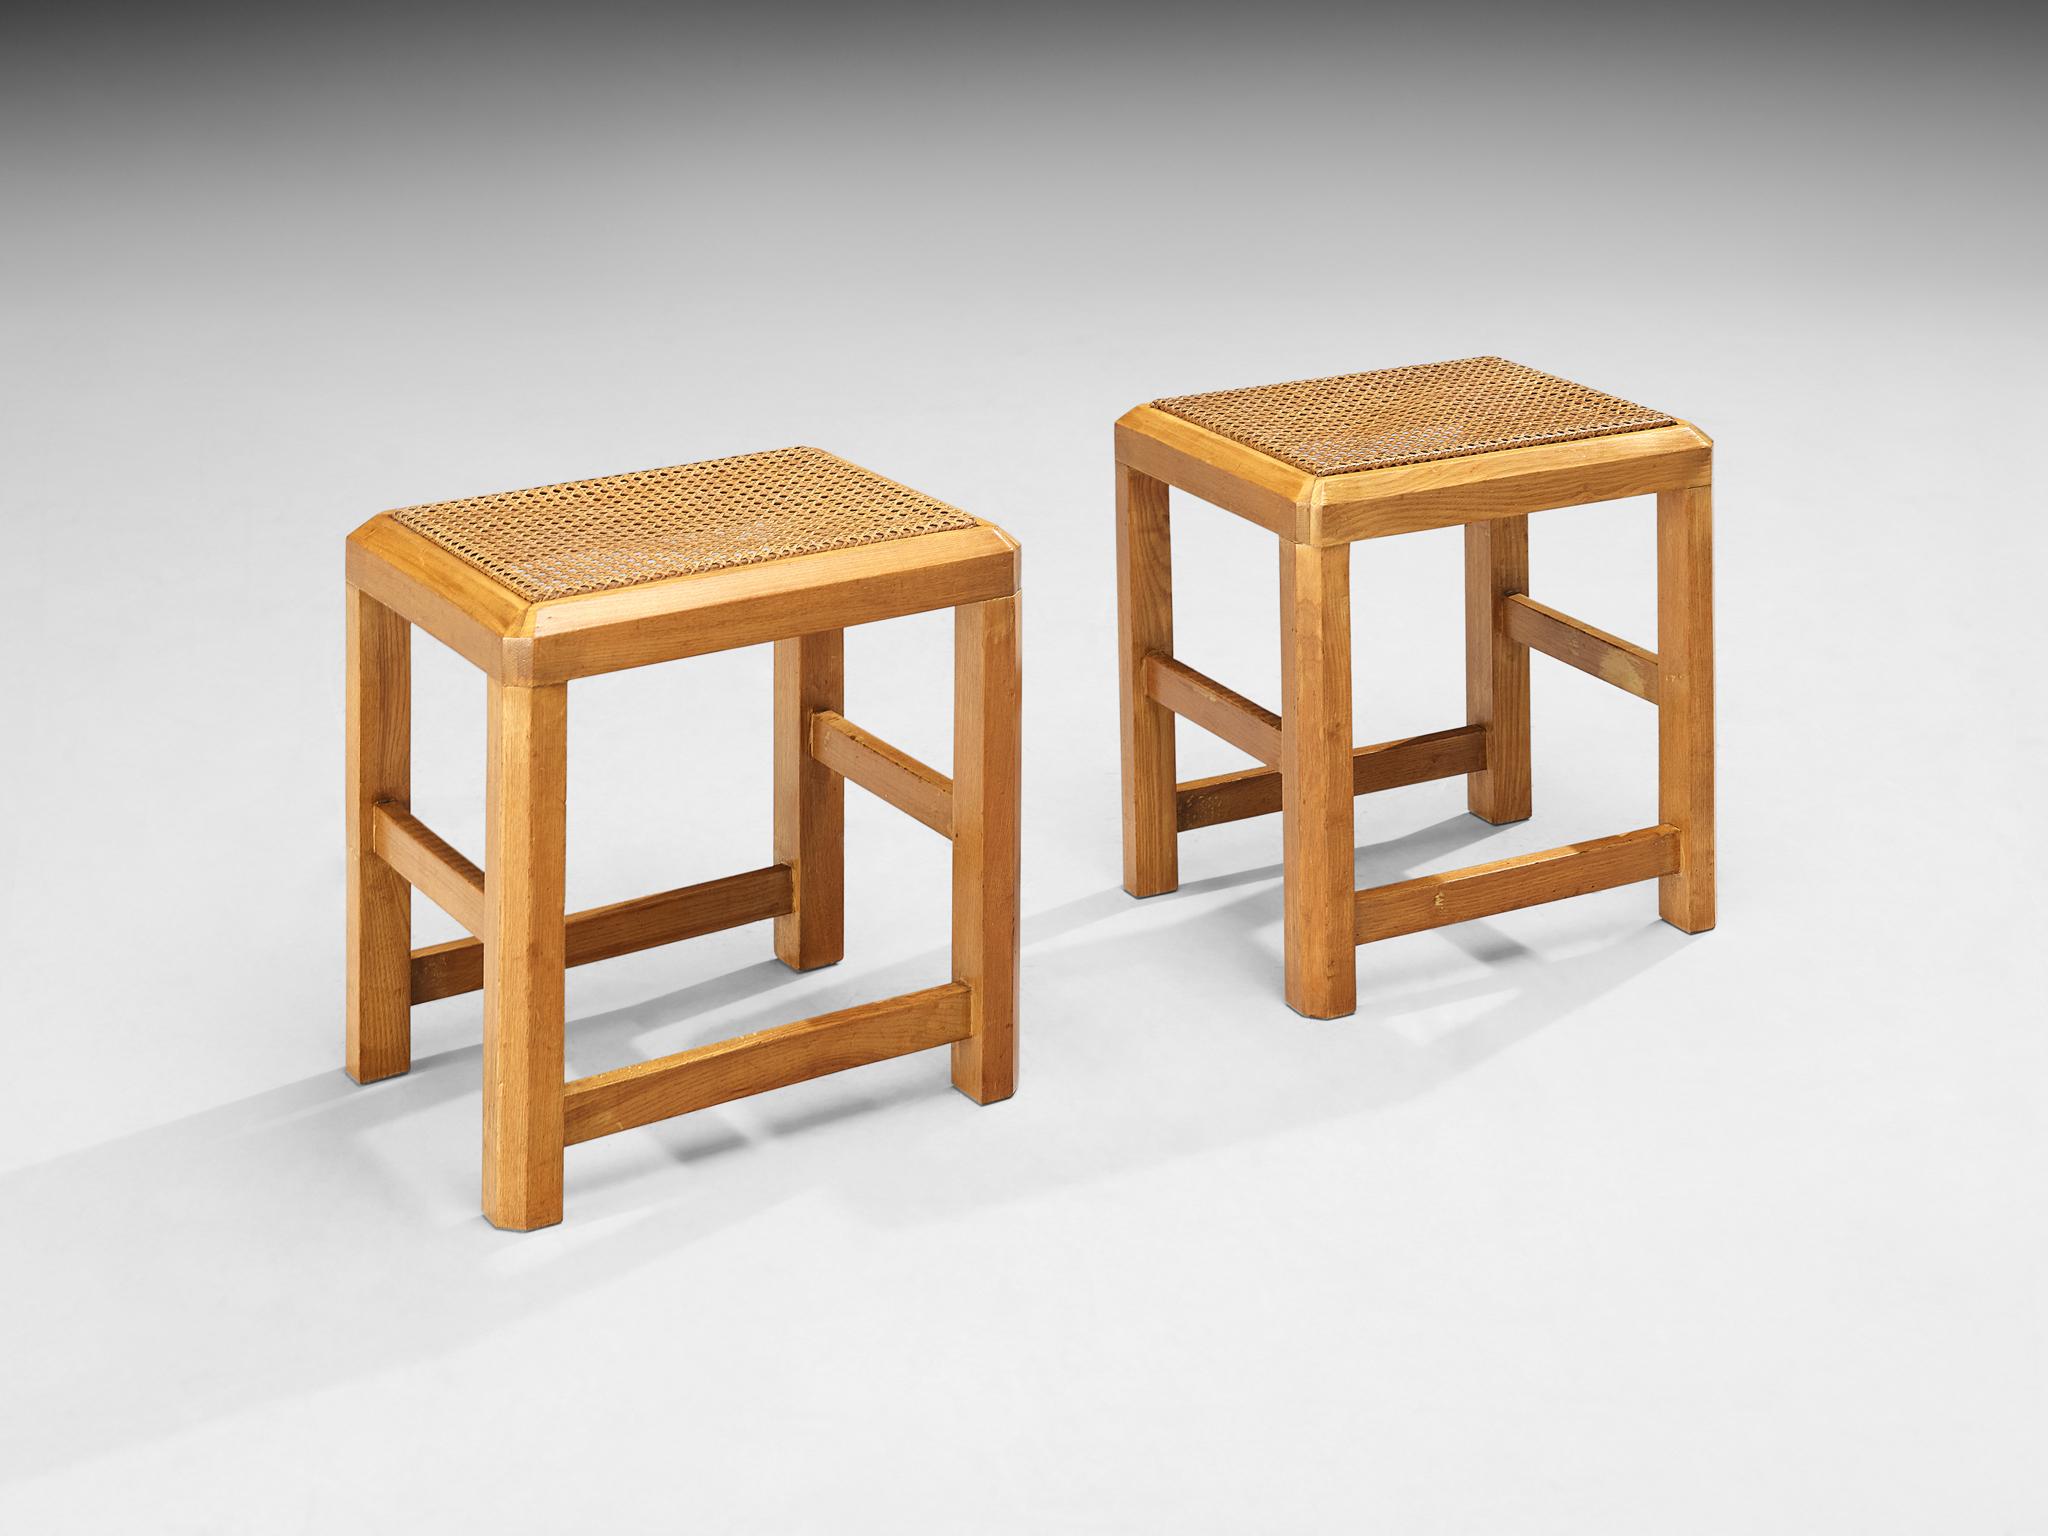 Pair of stools, cane, beech, Italy, 1970s

Simple and geometric shapes, free from ornamentation mark the design. The wooden frame is rectangular with bevelled edges that smooth the overall sturdy appearance. The seats are covered in octagonal mesh